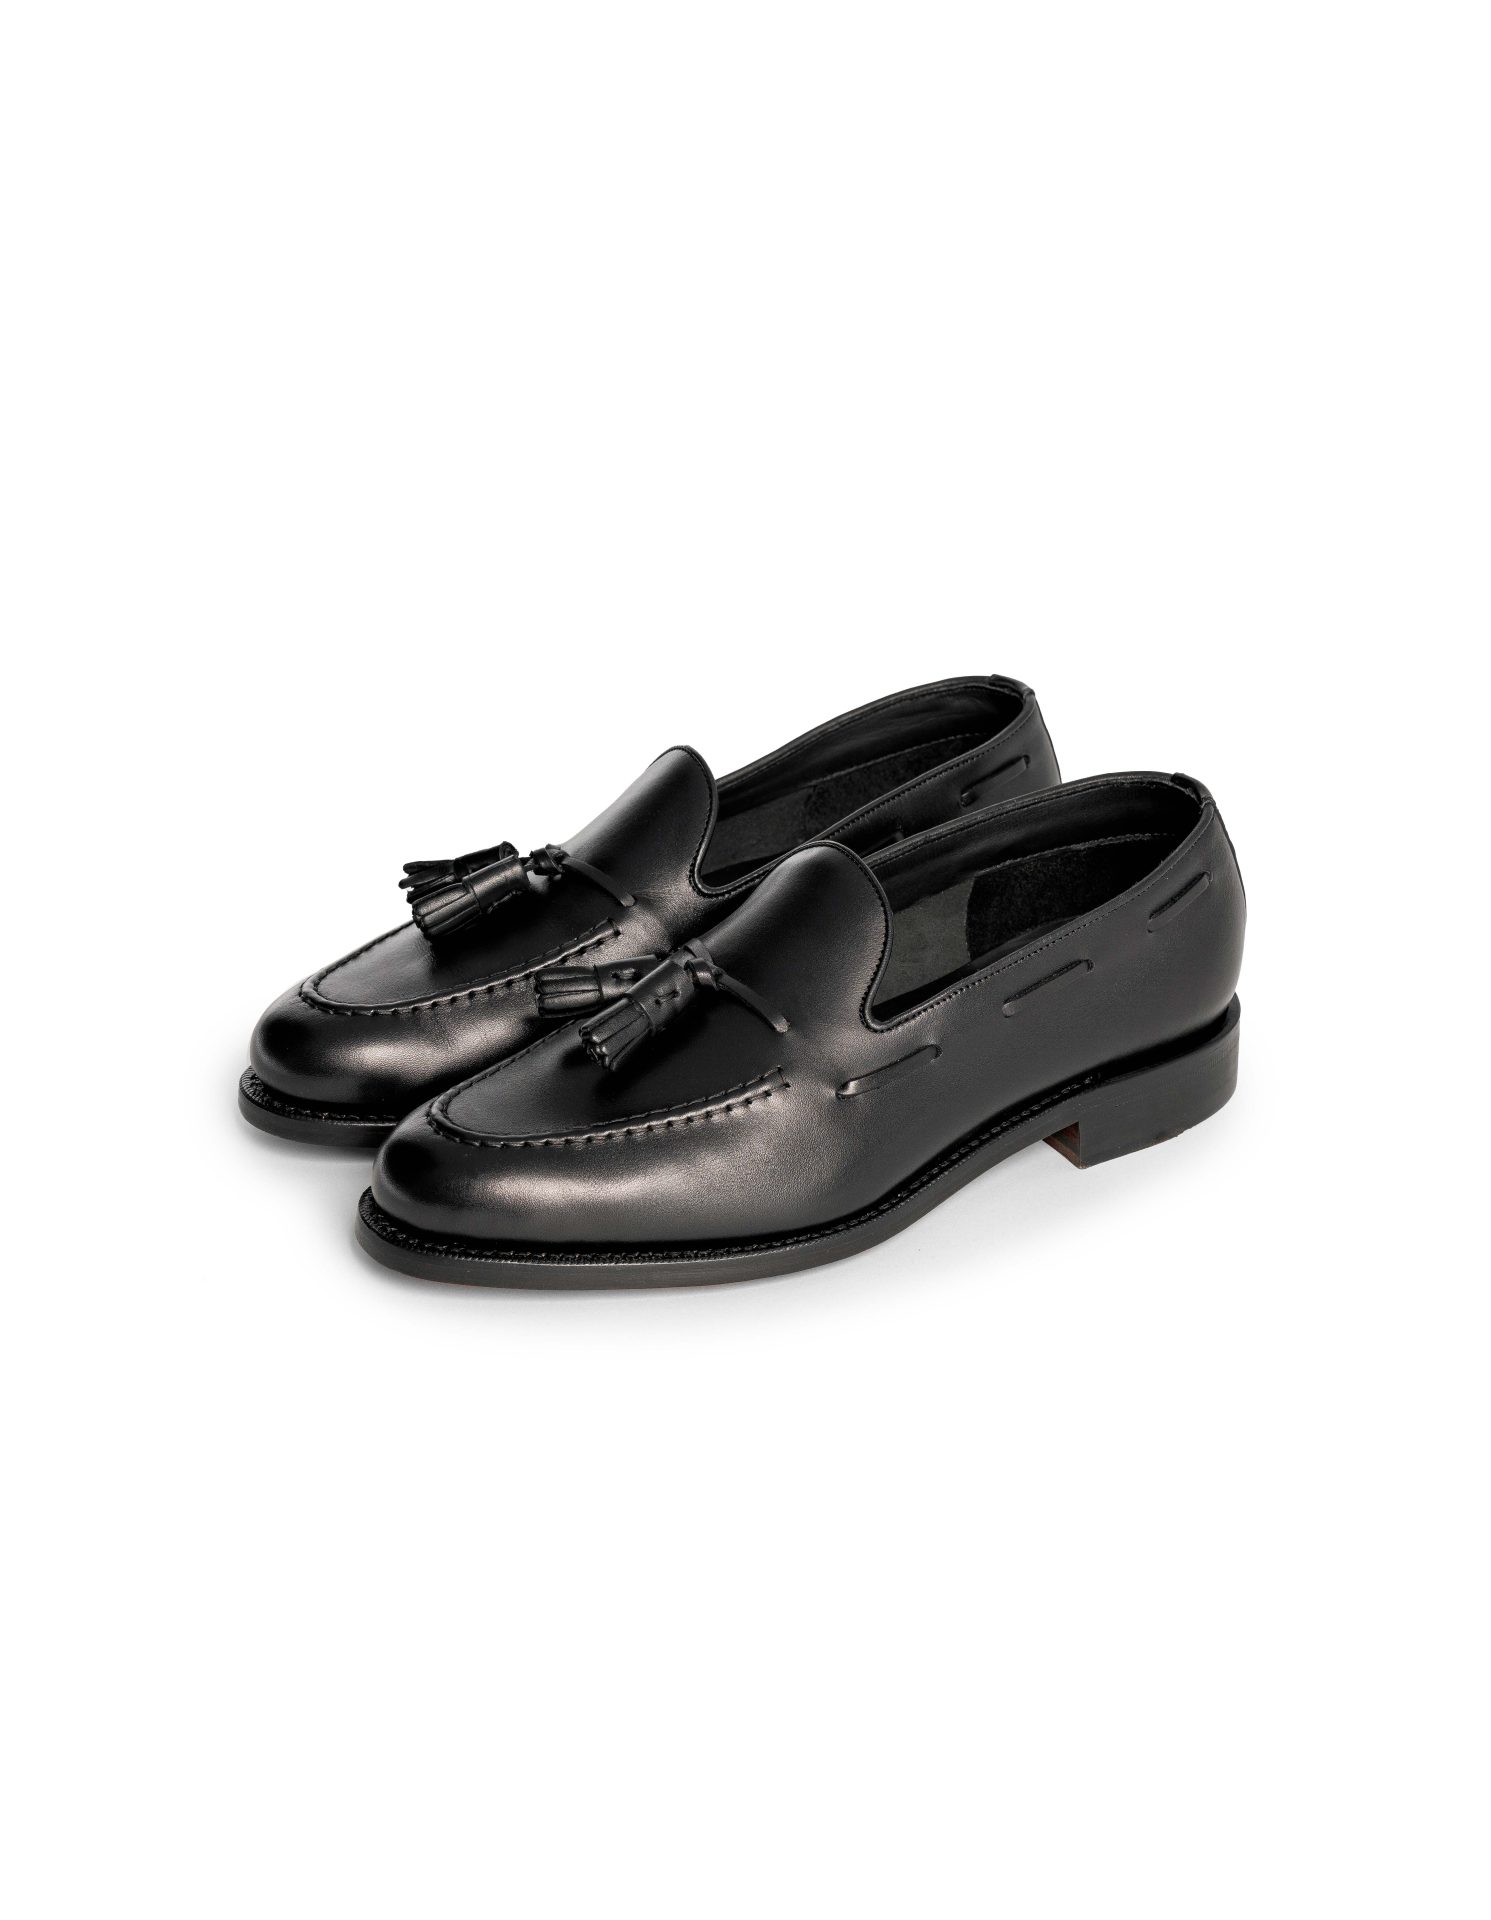 BERWICK 5139 Unlined Tassel Loafer Chateaubriand Negro - The Refinement